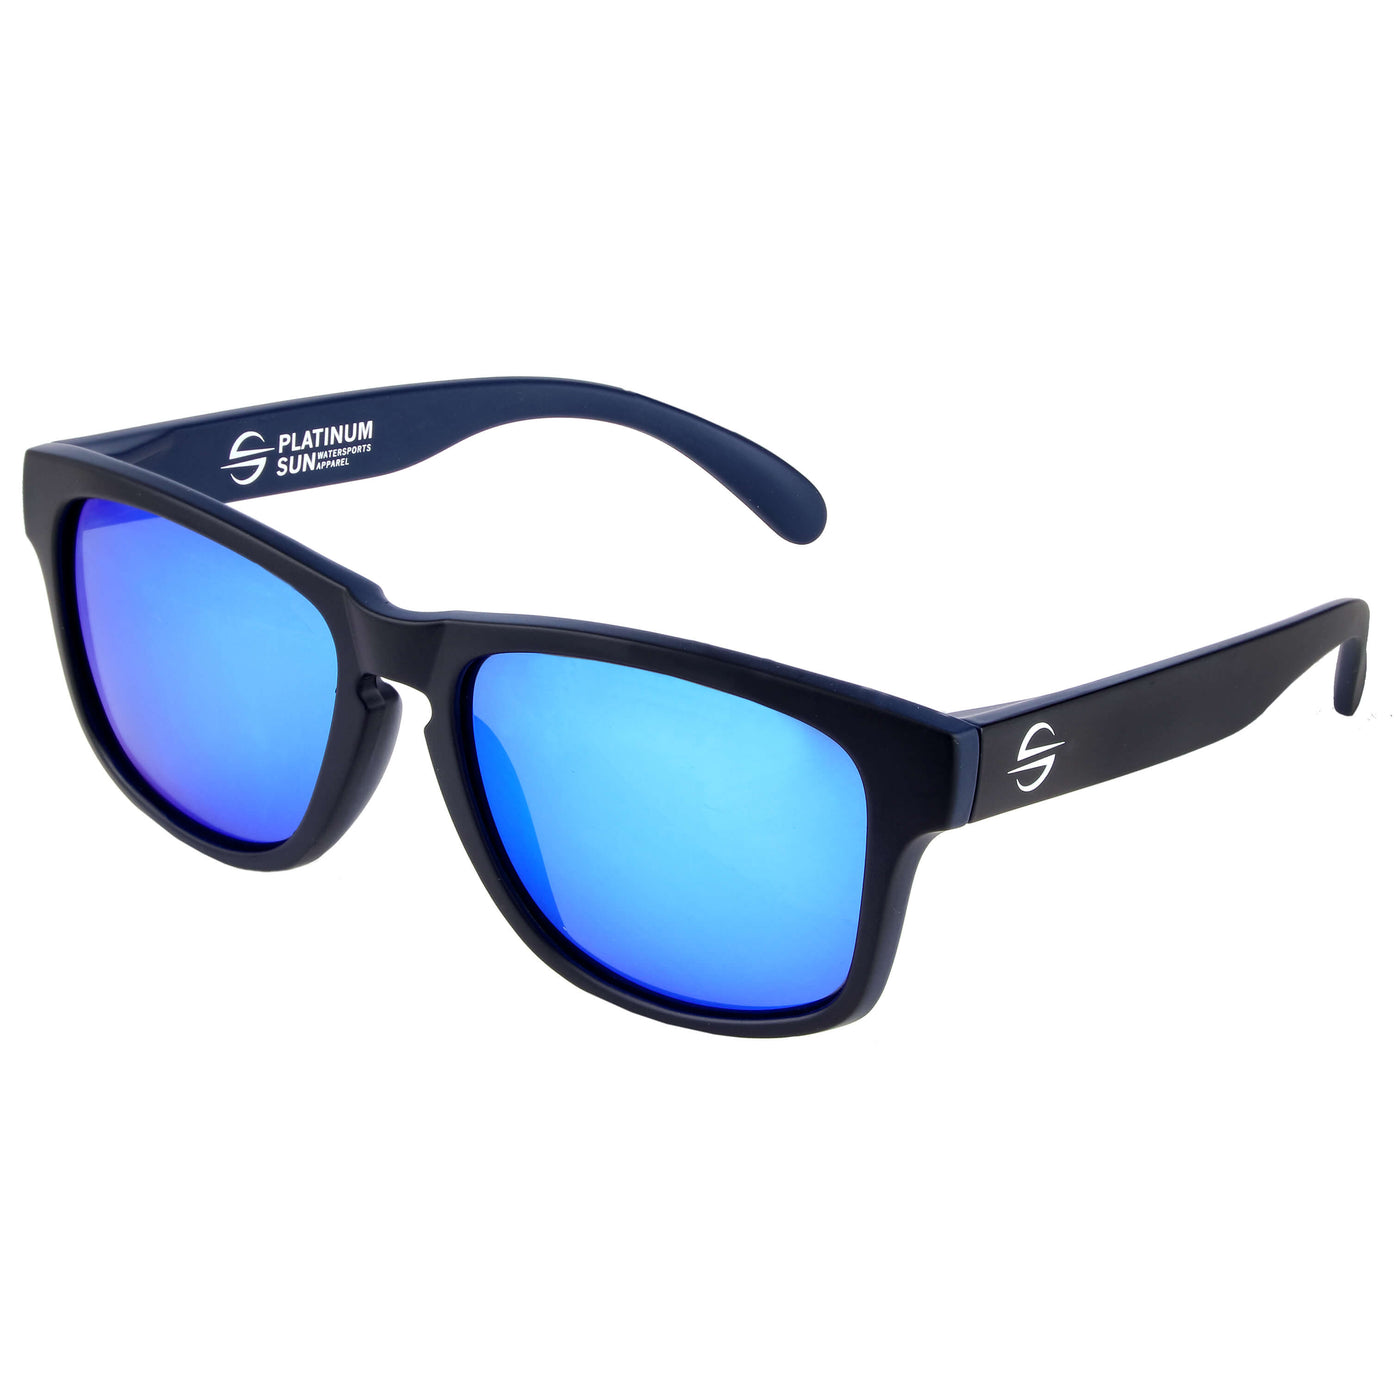 New FLOATING SUNGLASSES- BLUE Water Sports / Accessories